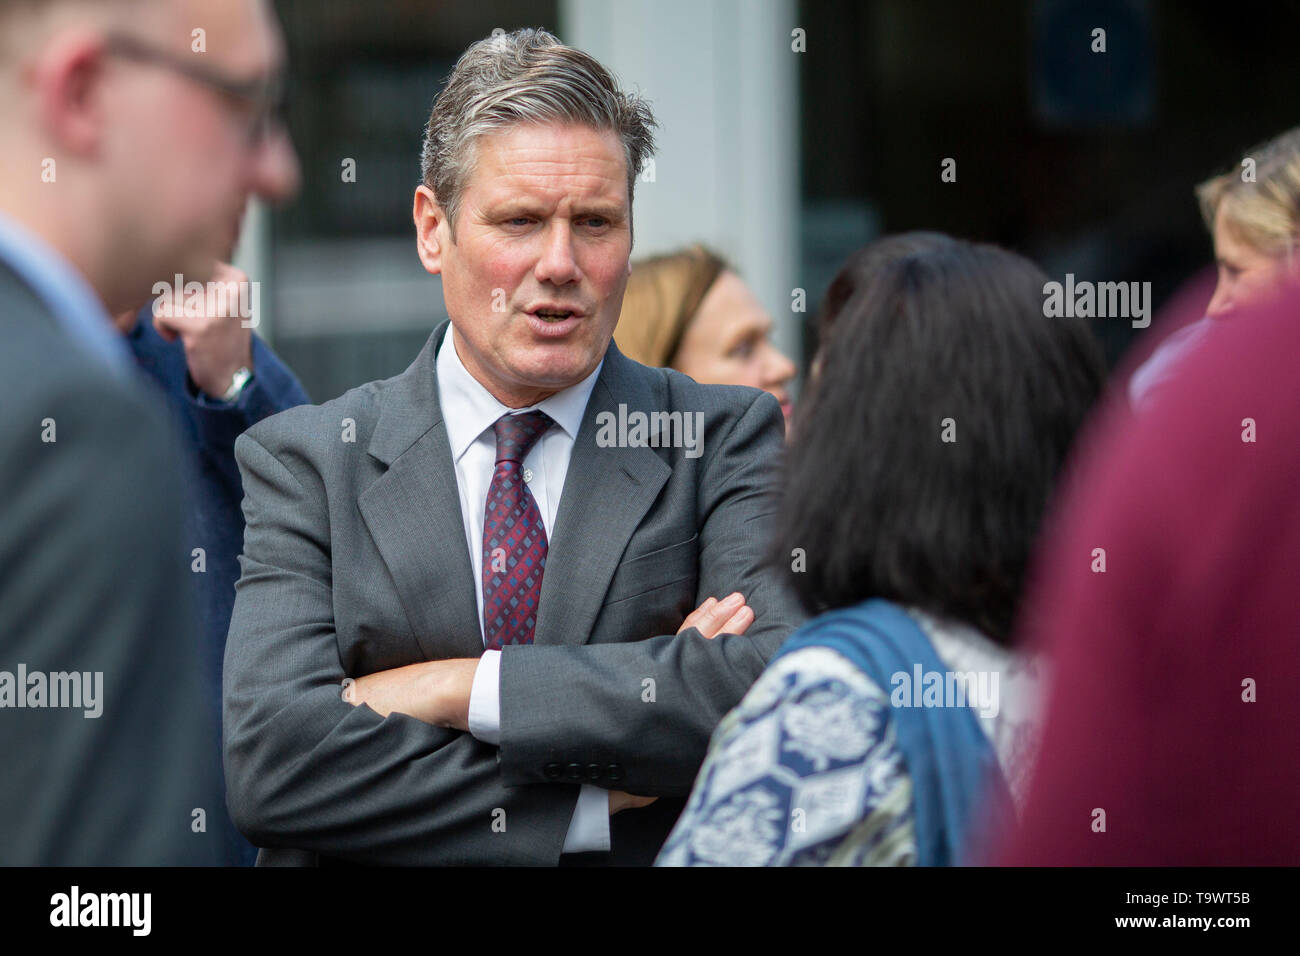 Cardiff, Wales, UK, May 20th 2019. Labour MP Keir Starmer speaks with a supporter during Welsh Labour campaigning for the European Elections in Roath, Stock Photo